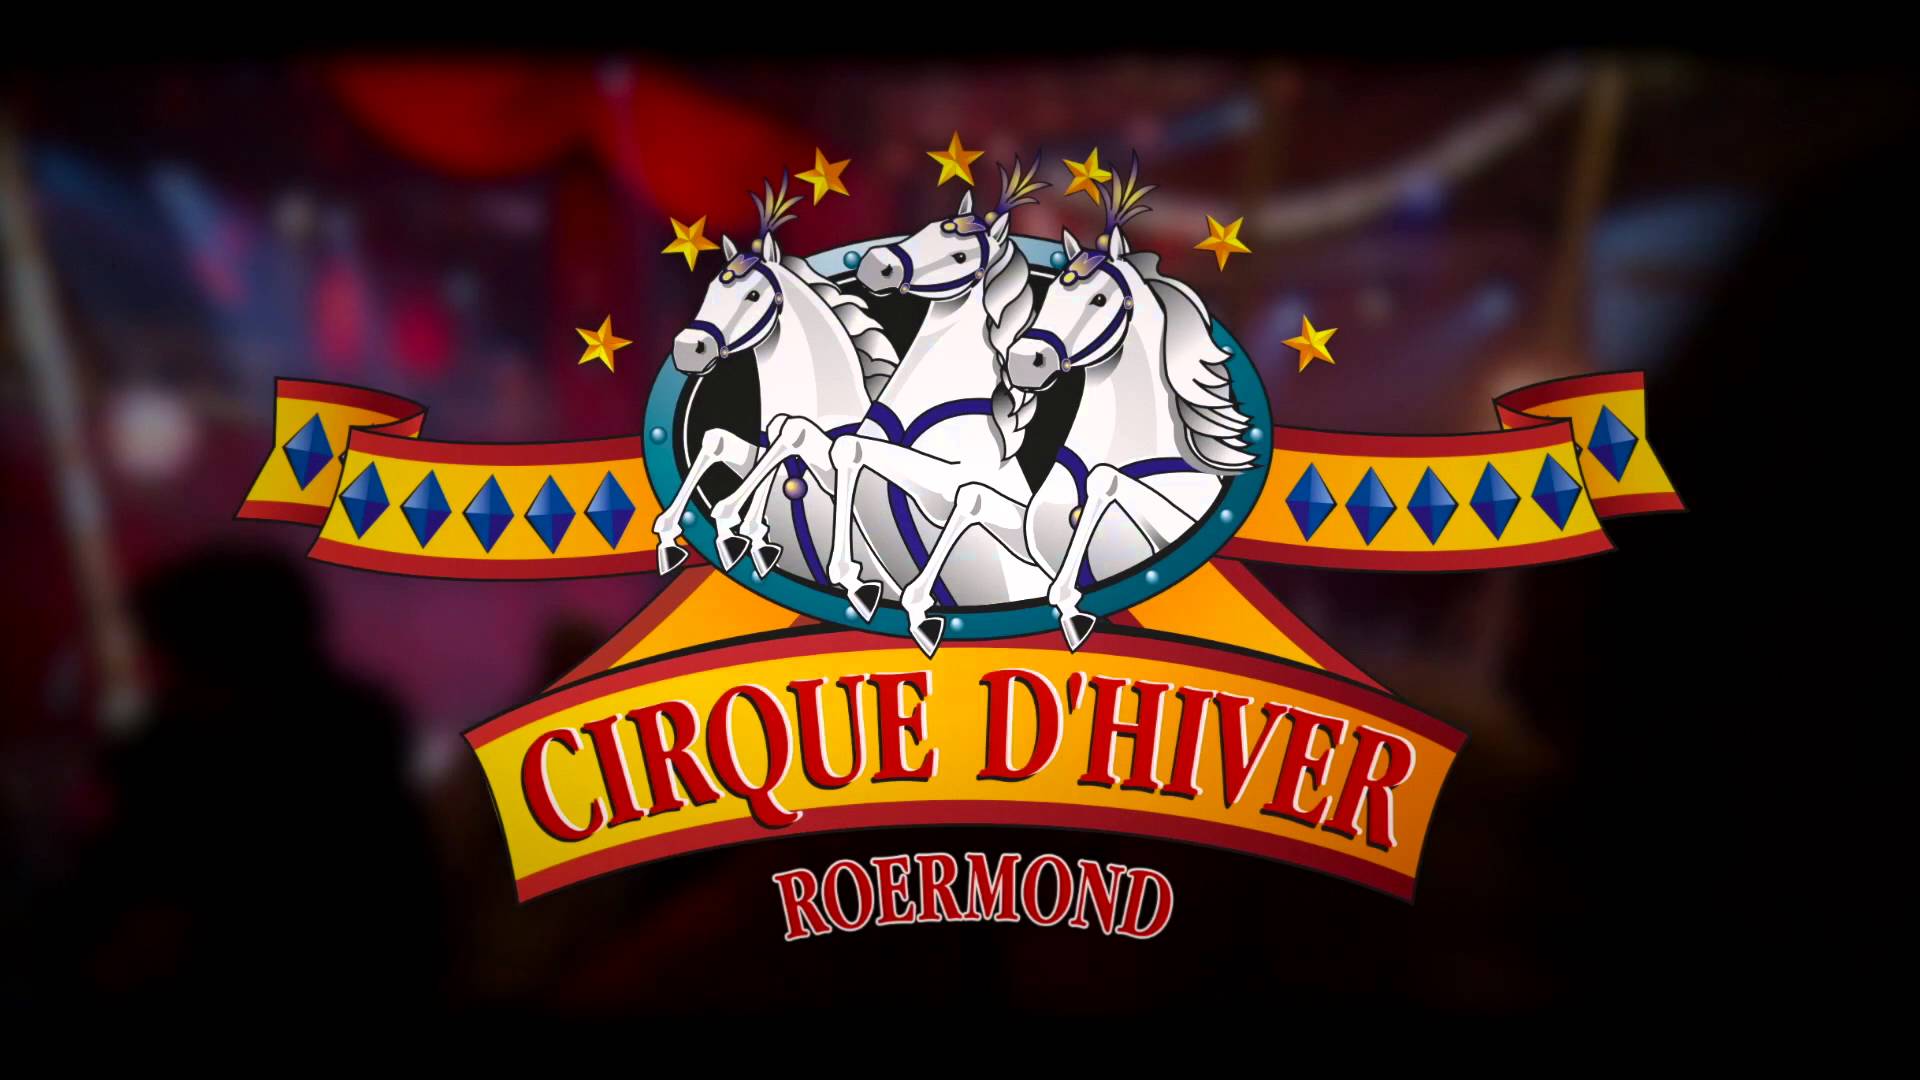 Cirque dHiver